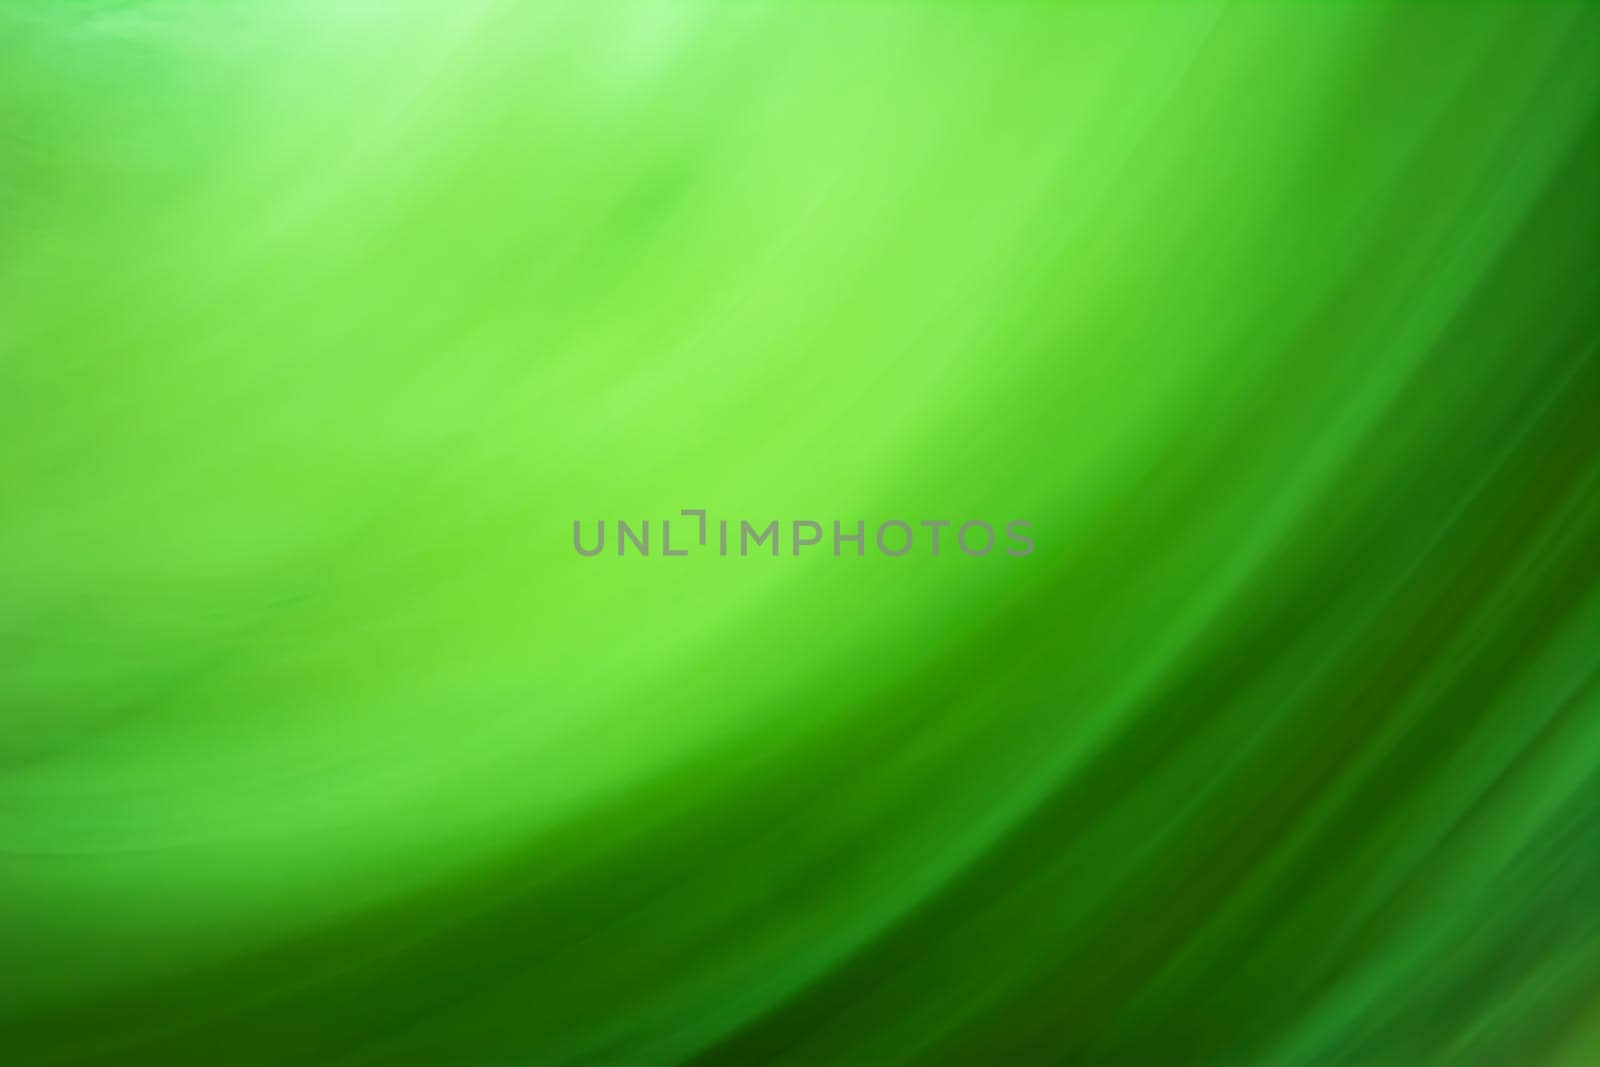 Green abstract background with semicircles and place for writing. Heel counter with a smooth gradient from light to dark.